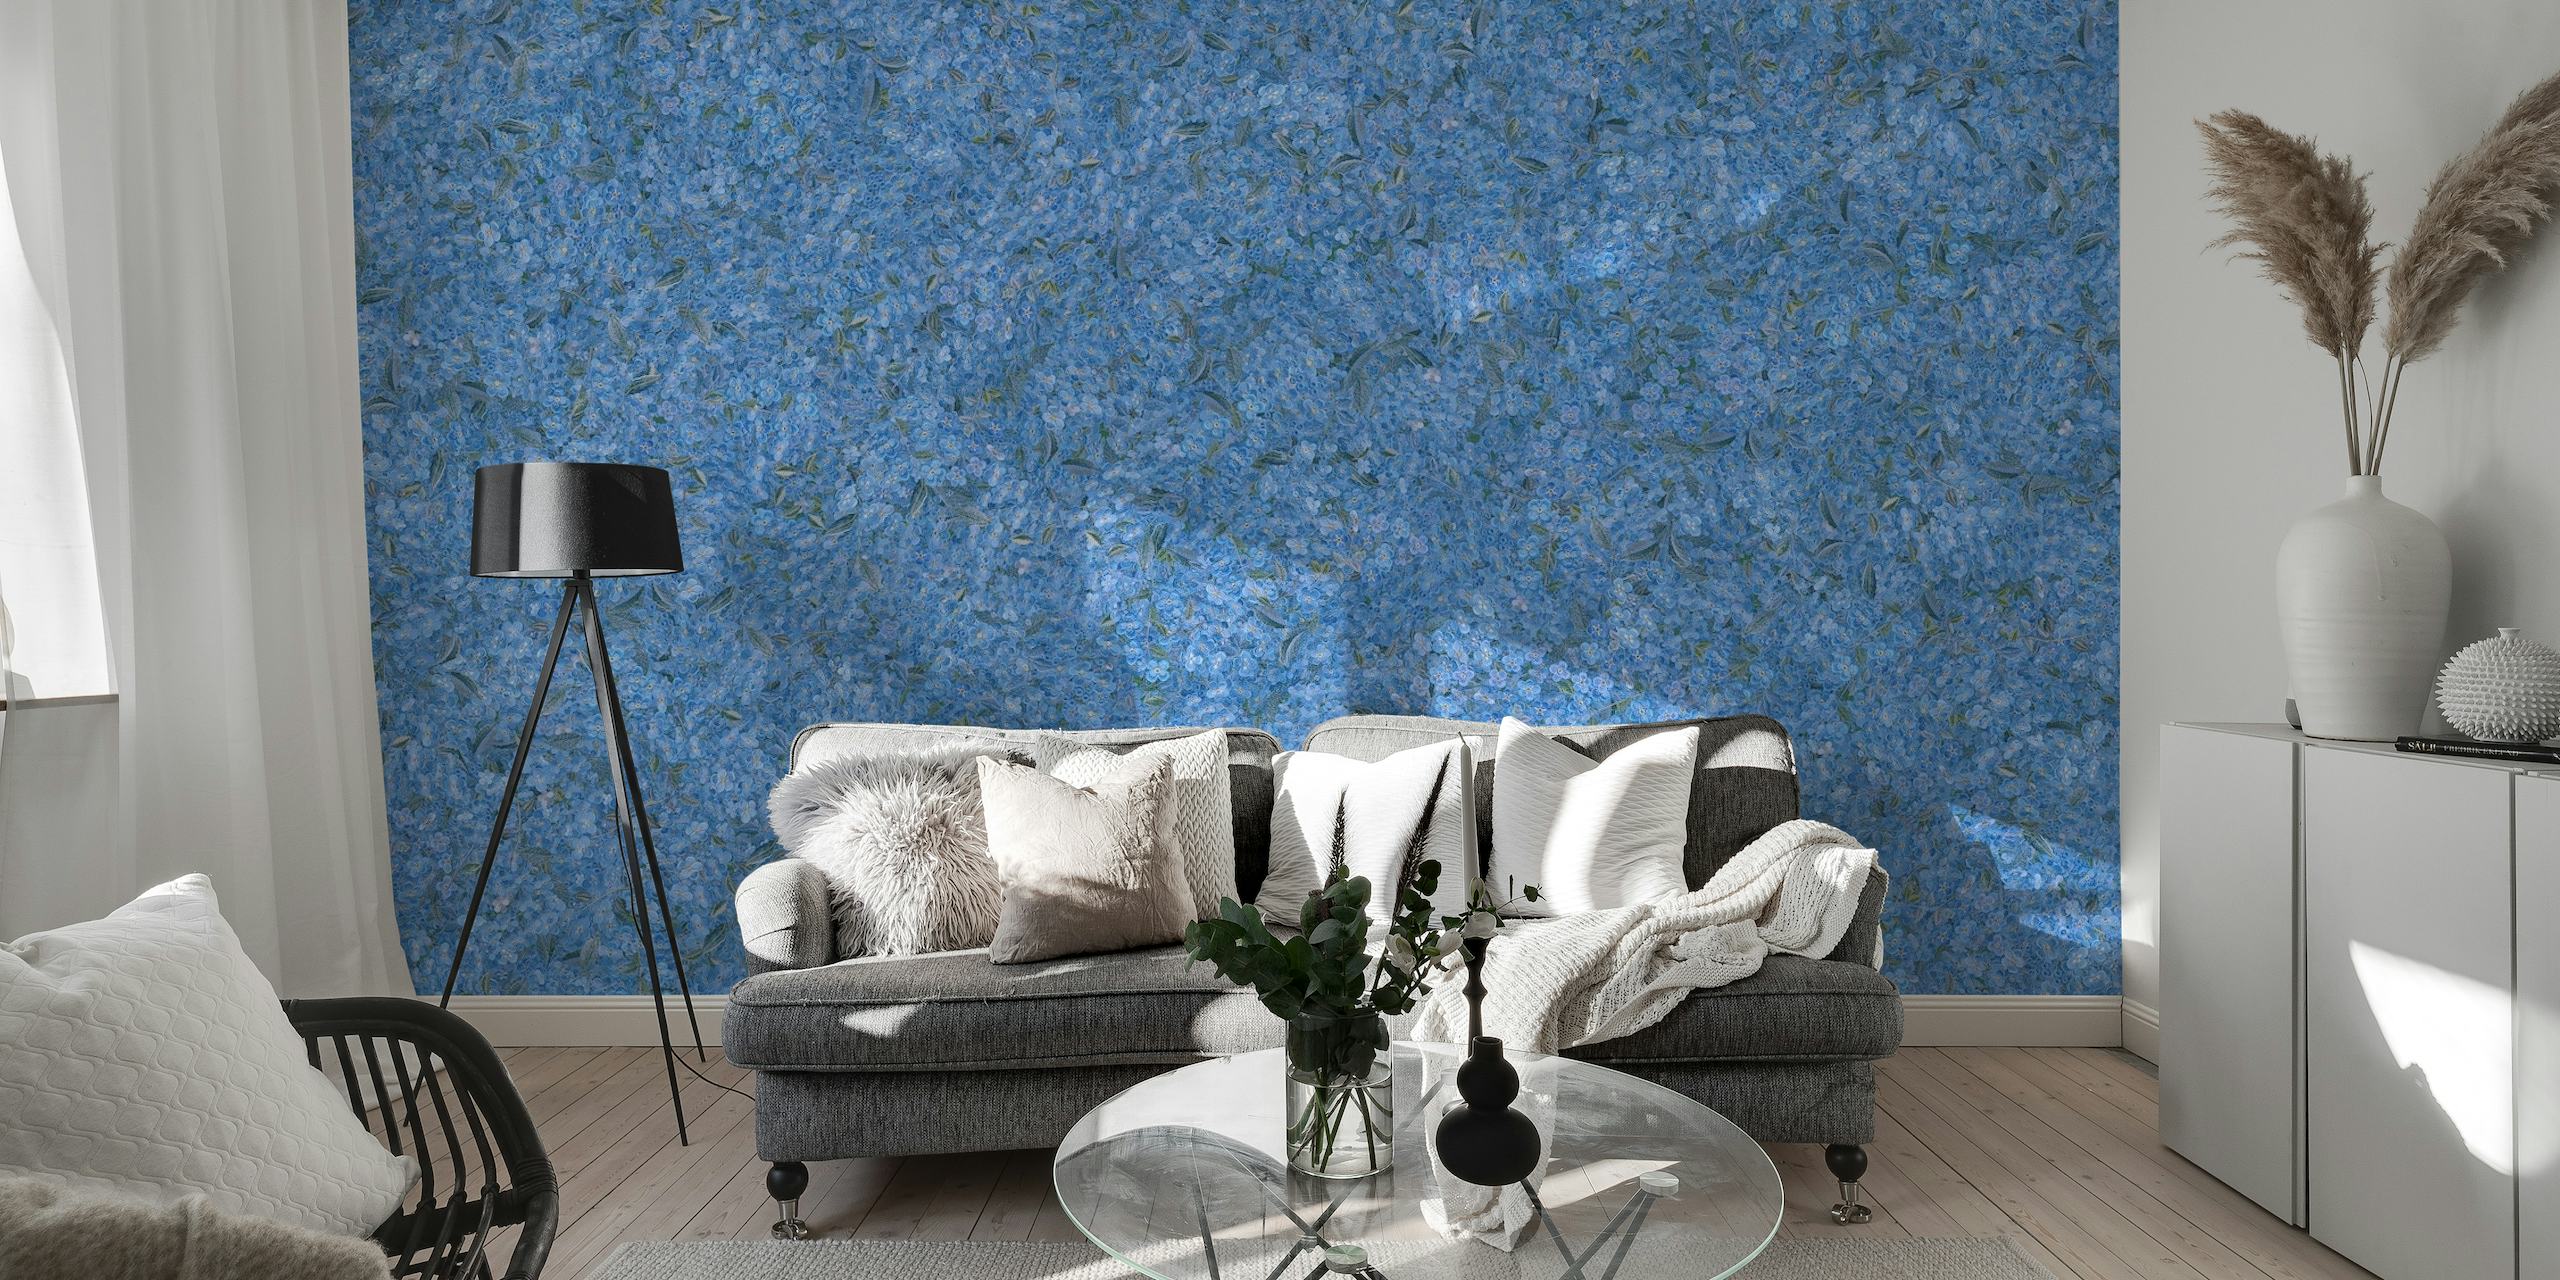 Embroidery-style forget-me-not flowers on a deep blue wall mural